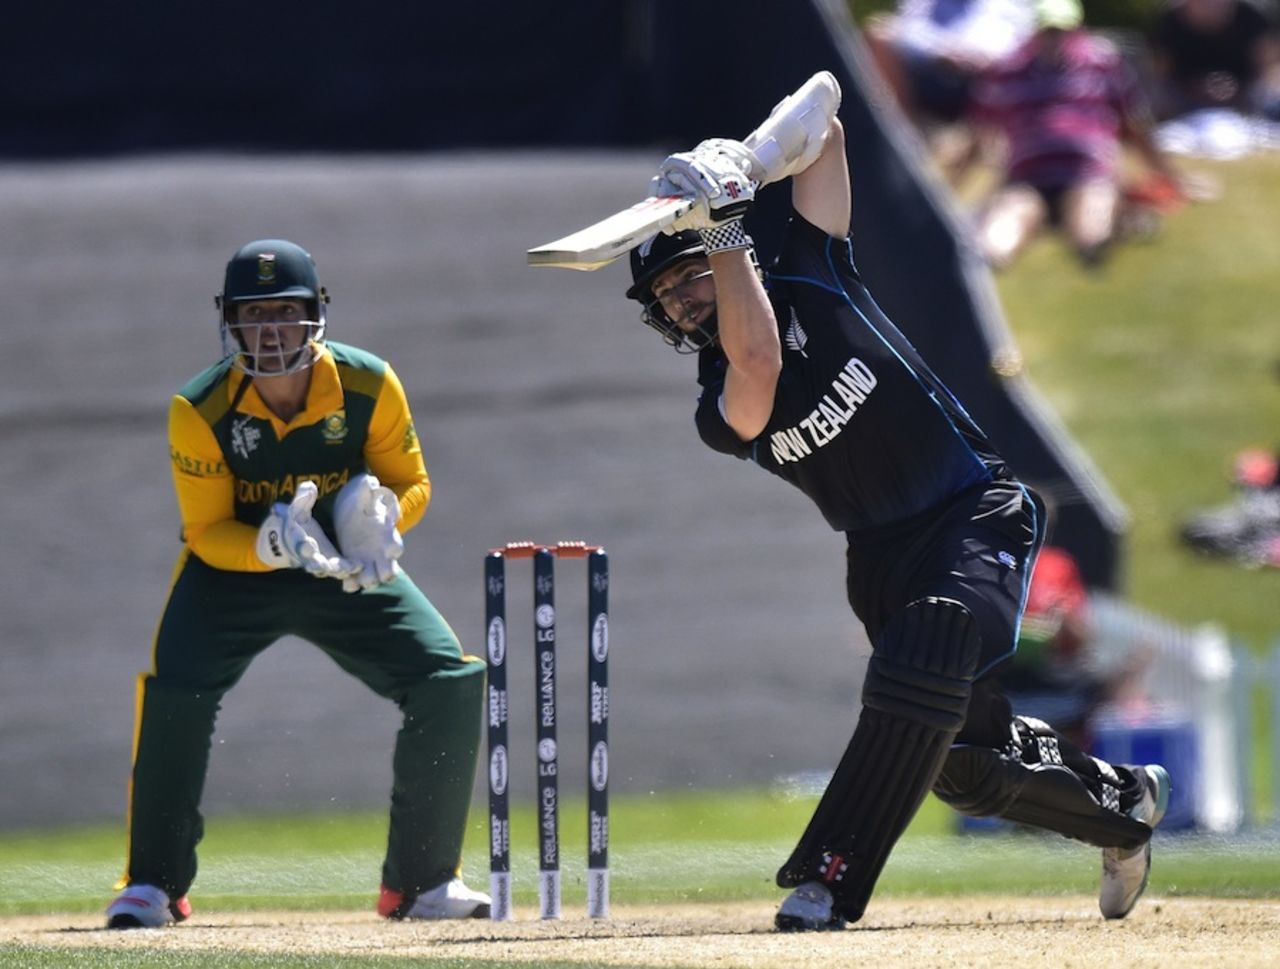 Kane Williamson drives through cover, New Zealand v South Africa, World Cup warm-up match, Christchurch, February 11, 2015